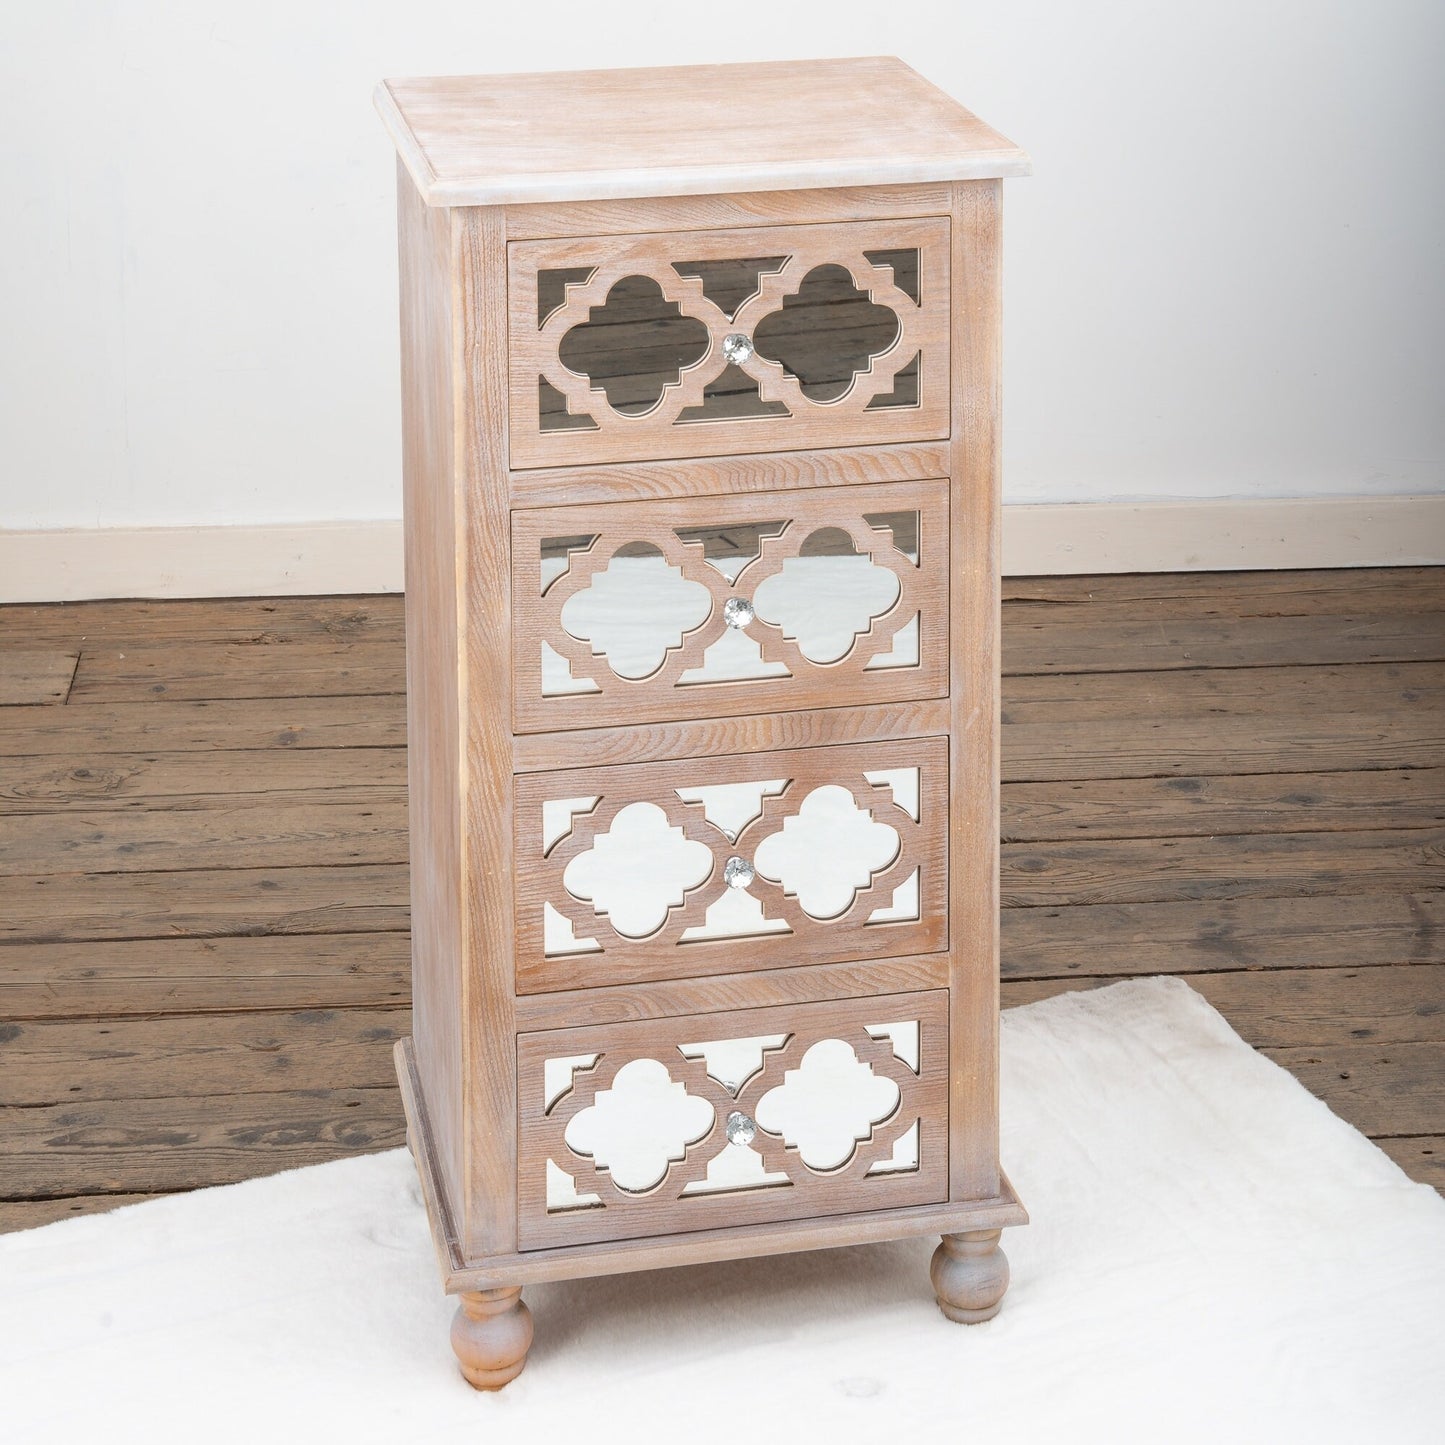 Washed Oak Effect Mirrored Tallboy Chest of Drawers